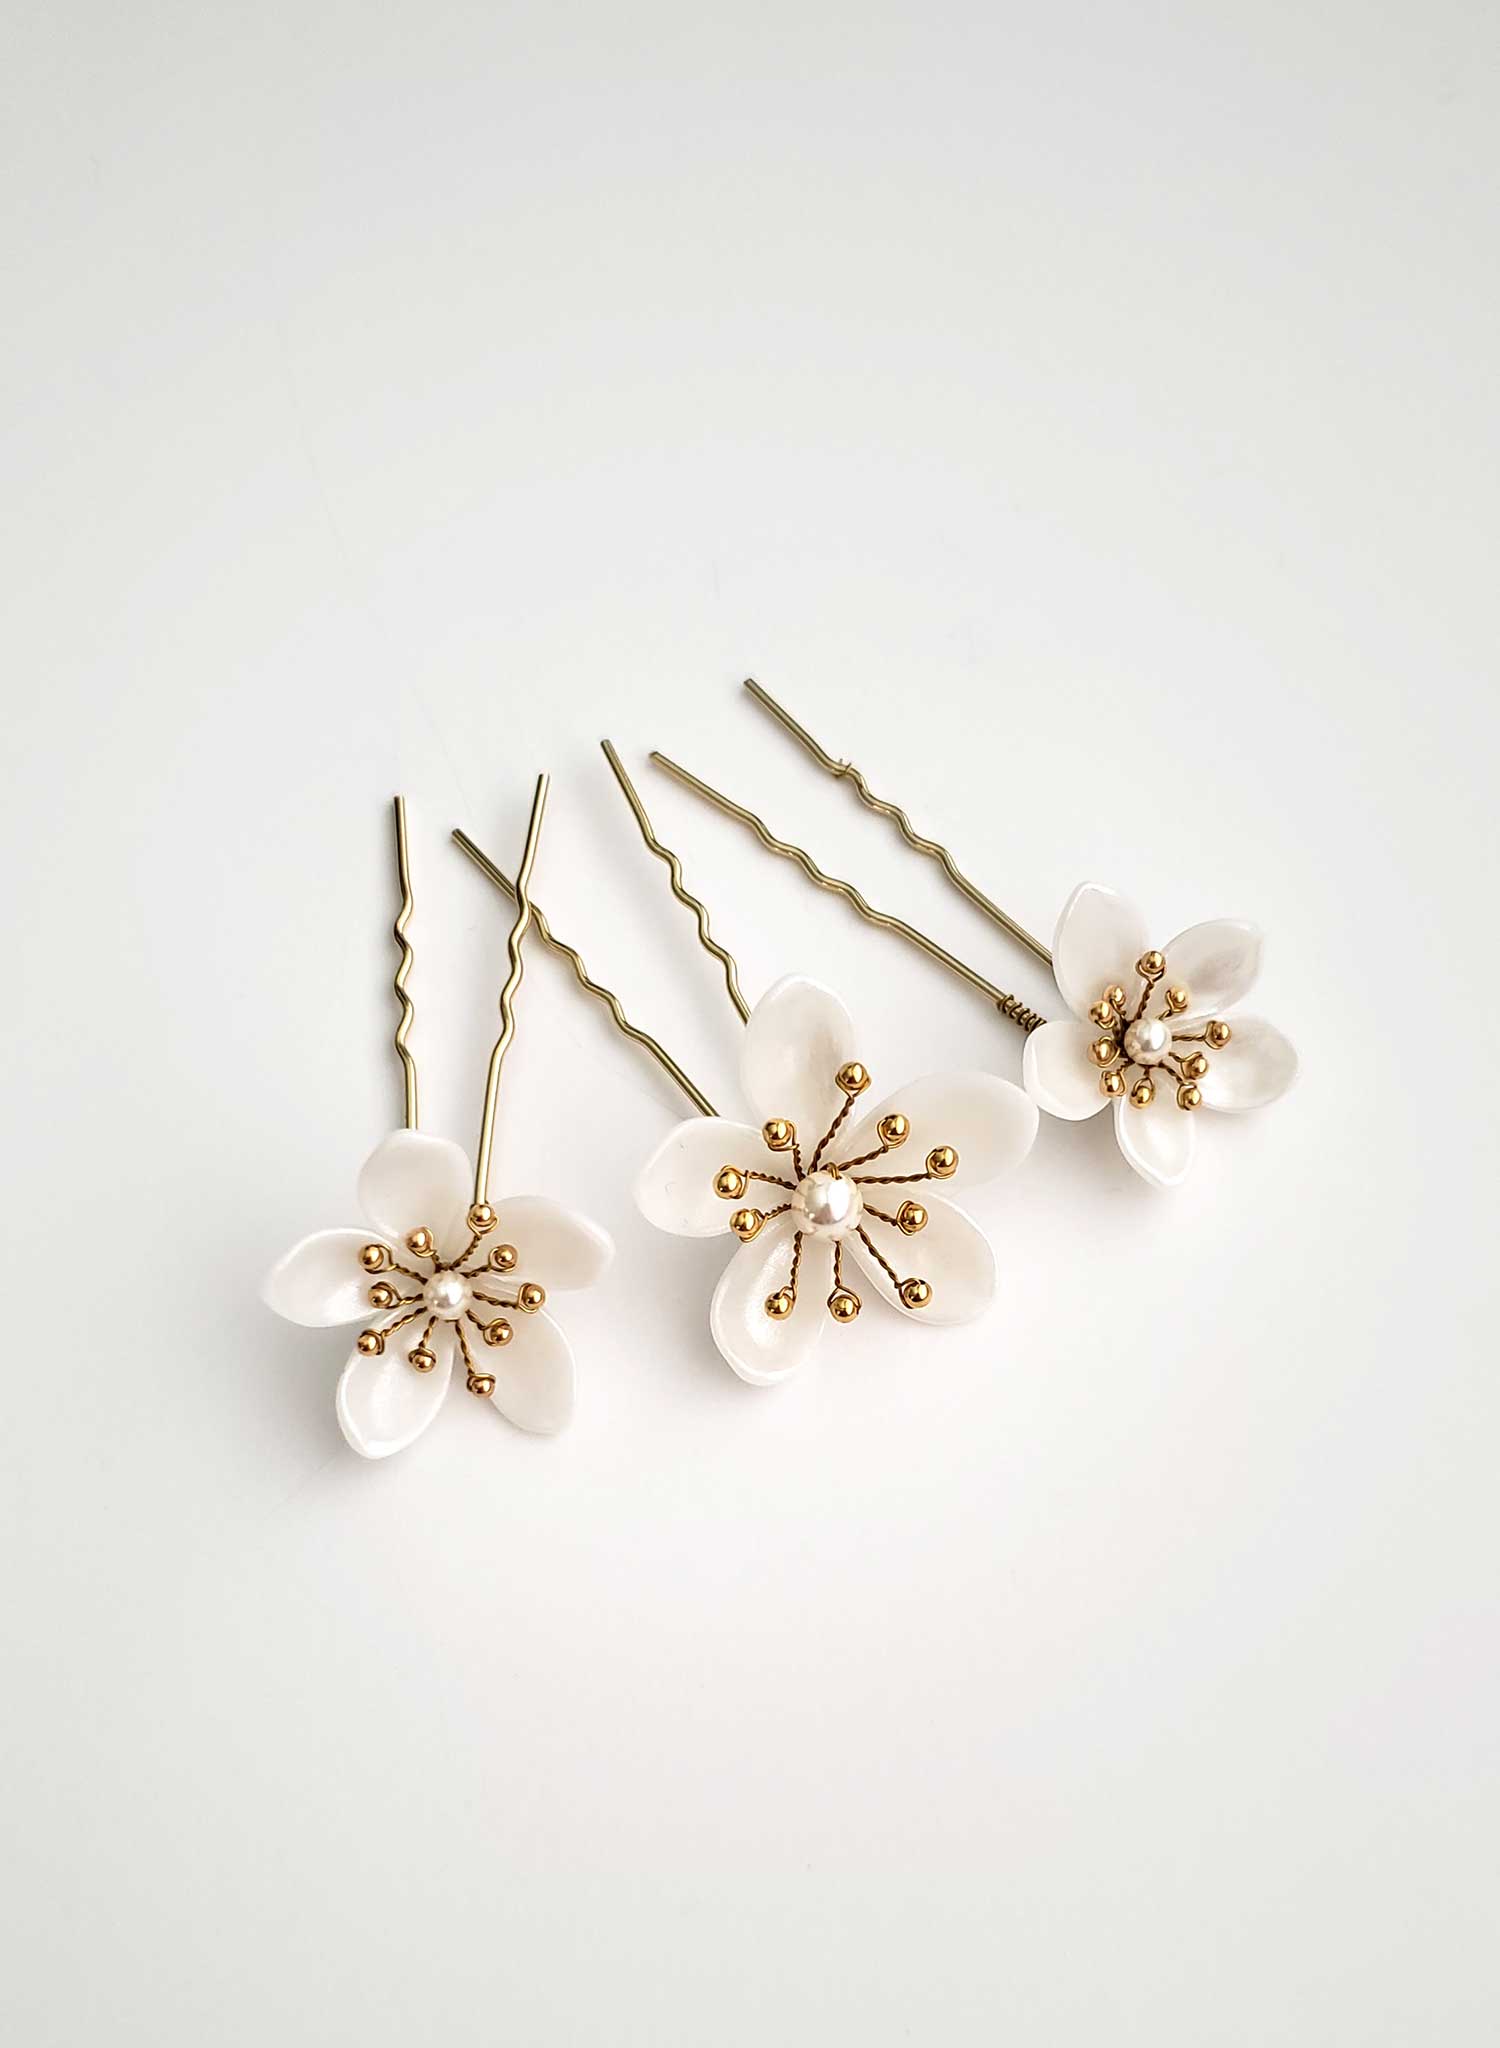 Twigs & Honey Bridal Hair Pins, Flower Pins - Full Bloom Clusters Pin Set of 3 - Style #2322 White